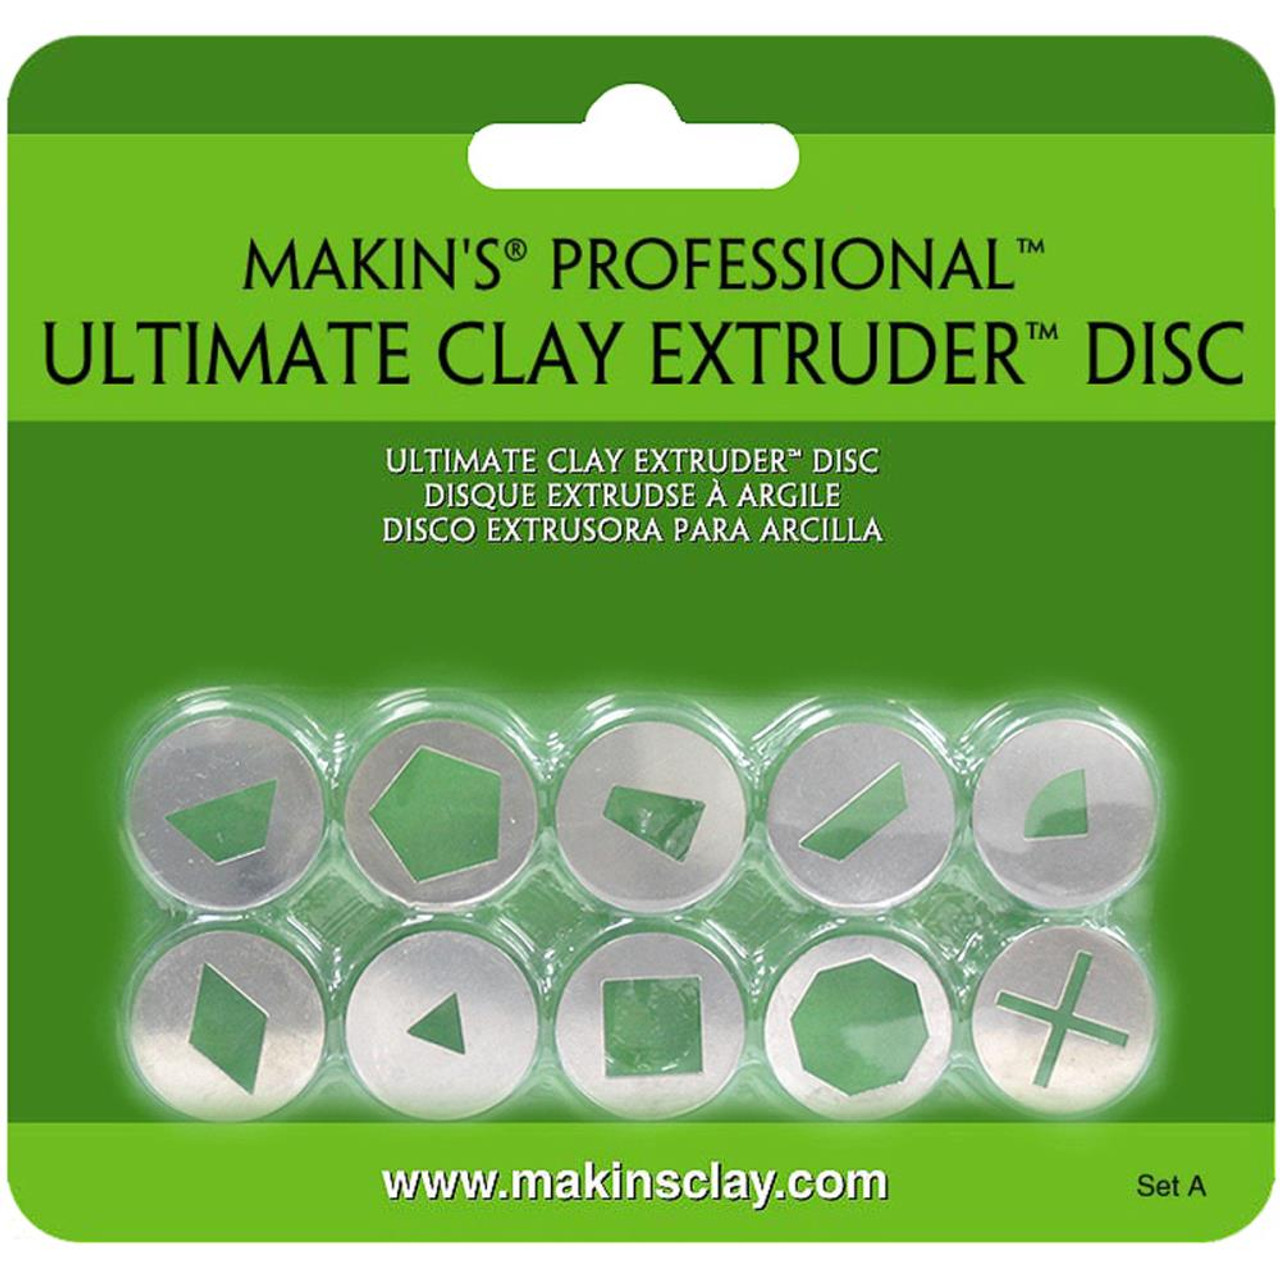 Makin's Professional Ultimate Clay Extruder Deluxe Set 21pcs